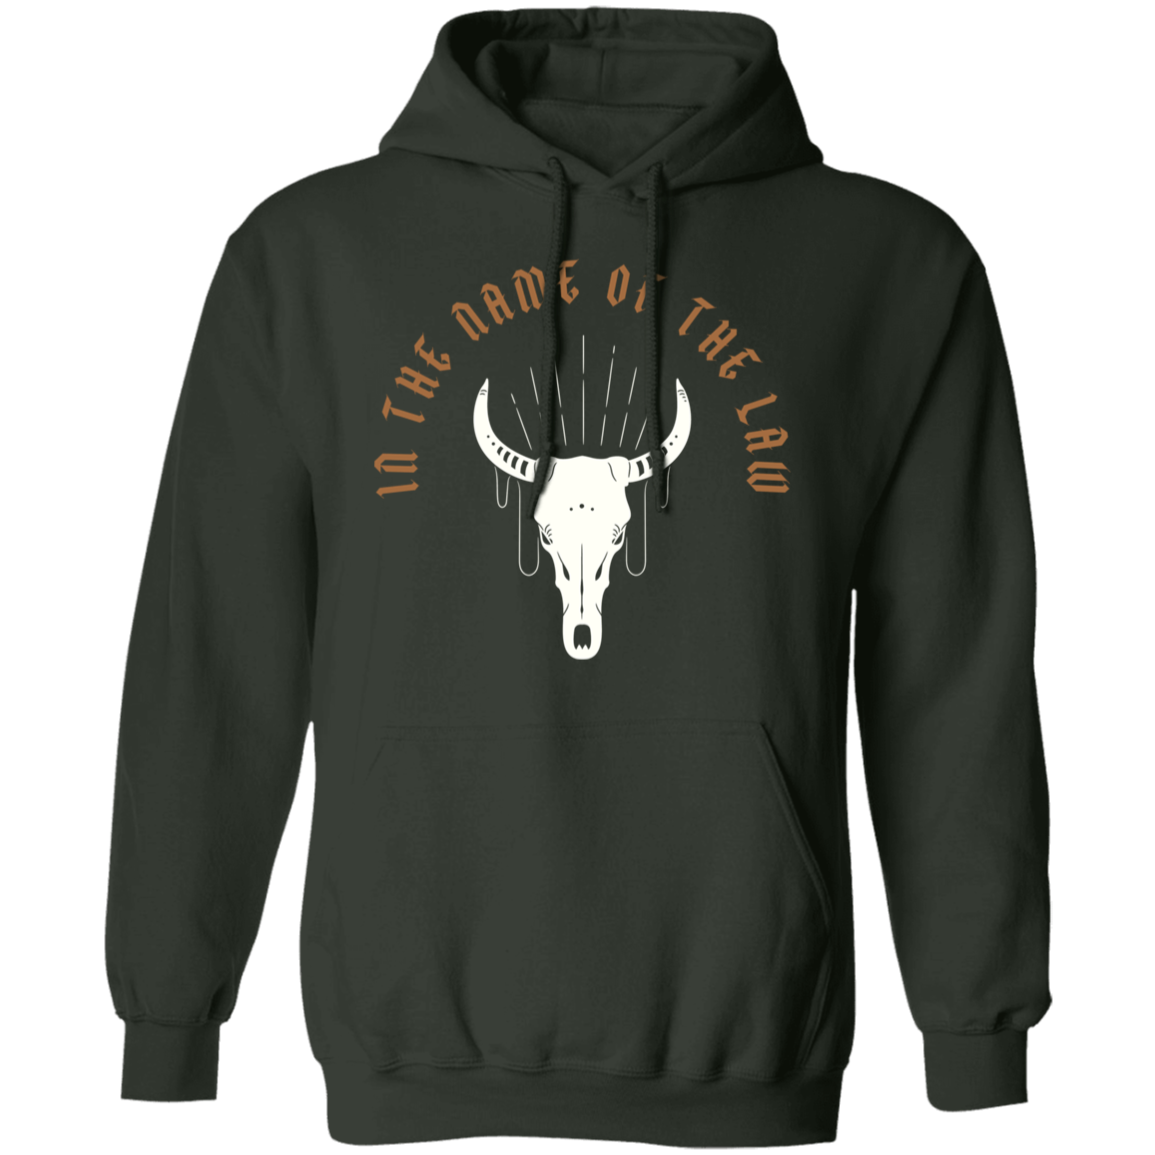 In the Name of The Law Hoodie